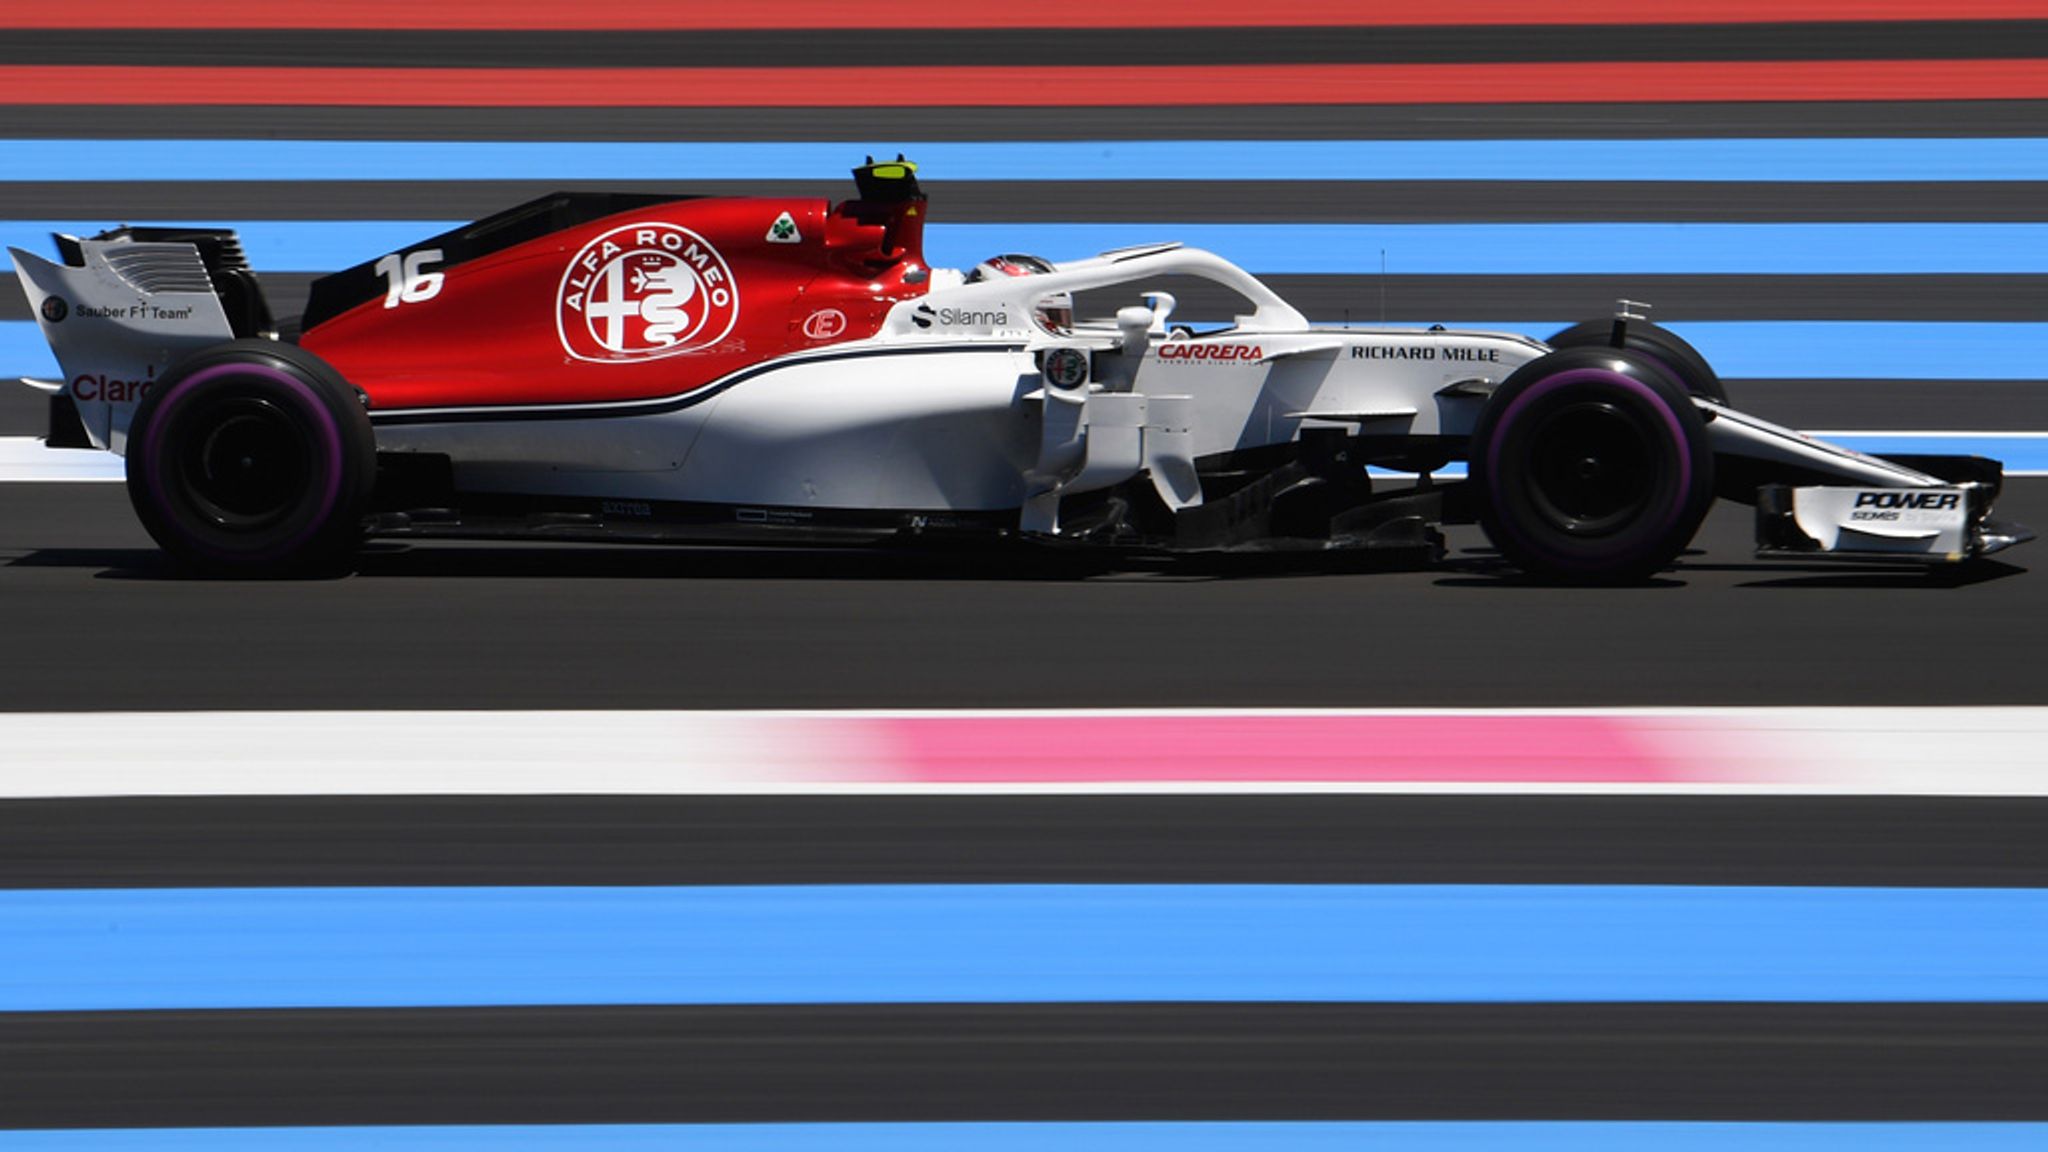 F1 Rumour: Major Details In Charles Leclerc's Ferrari Contract Revealed -  F1 Briefings: Formula 1 News, Rumors, Standings and More